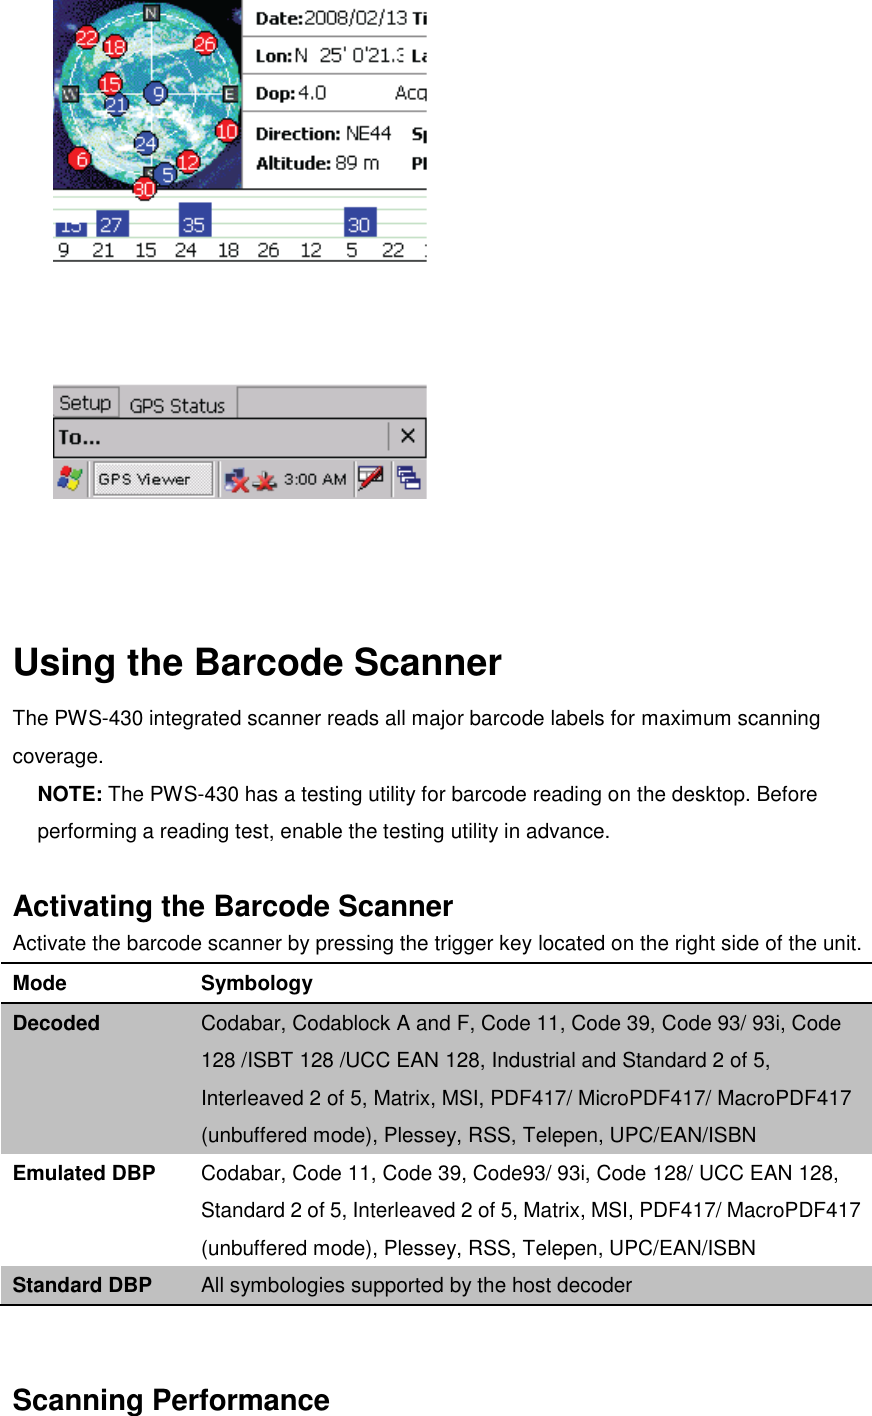     Using the Barcode Scanner The PWS-430 integrated scanner reads all major barcode labels for maximum scanning coverage. NOTE: The PWS-430 has a testing utility for barcode reading on the desktop. Before performing a reading test, enable the testing utility in advance.  Activating the Barcode Scanner Activate the barcode scanner by pressing the trigger key located on the right side of the unit. Mode Symbology Decoded Codabar, Codablock A and F, Code 11, Code 39, Code 93/ 93i, Code 128 /ISBT 128 /UCC EAN 128, Industrial and Standard 2 of 5, Interleaved 2 of 5, Matrix, MSI, PDF417/ MicroPDF417/ MacroPDF417 (unbuffered mode), Plessey, RSS, Telepen, UPC/EAN/ISBN Emulated DBP Codabar, Code 11, Code 39, Code93/ 93i, Code 128/ UCC EAN 128, Standard 2 of 5, Interleaved 2 of 5, Matrix, MSI, PDF417/ MacroPDF417 (unbuffered mode), Plessey, RSS, Telepen, UPC/EAN/ISBN Standard DBP All symbologies supported by the host decoder   Scanning Performance 